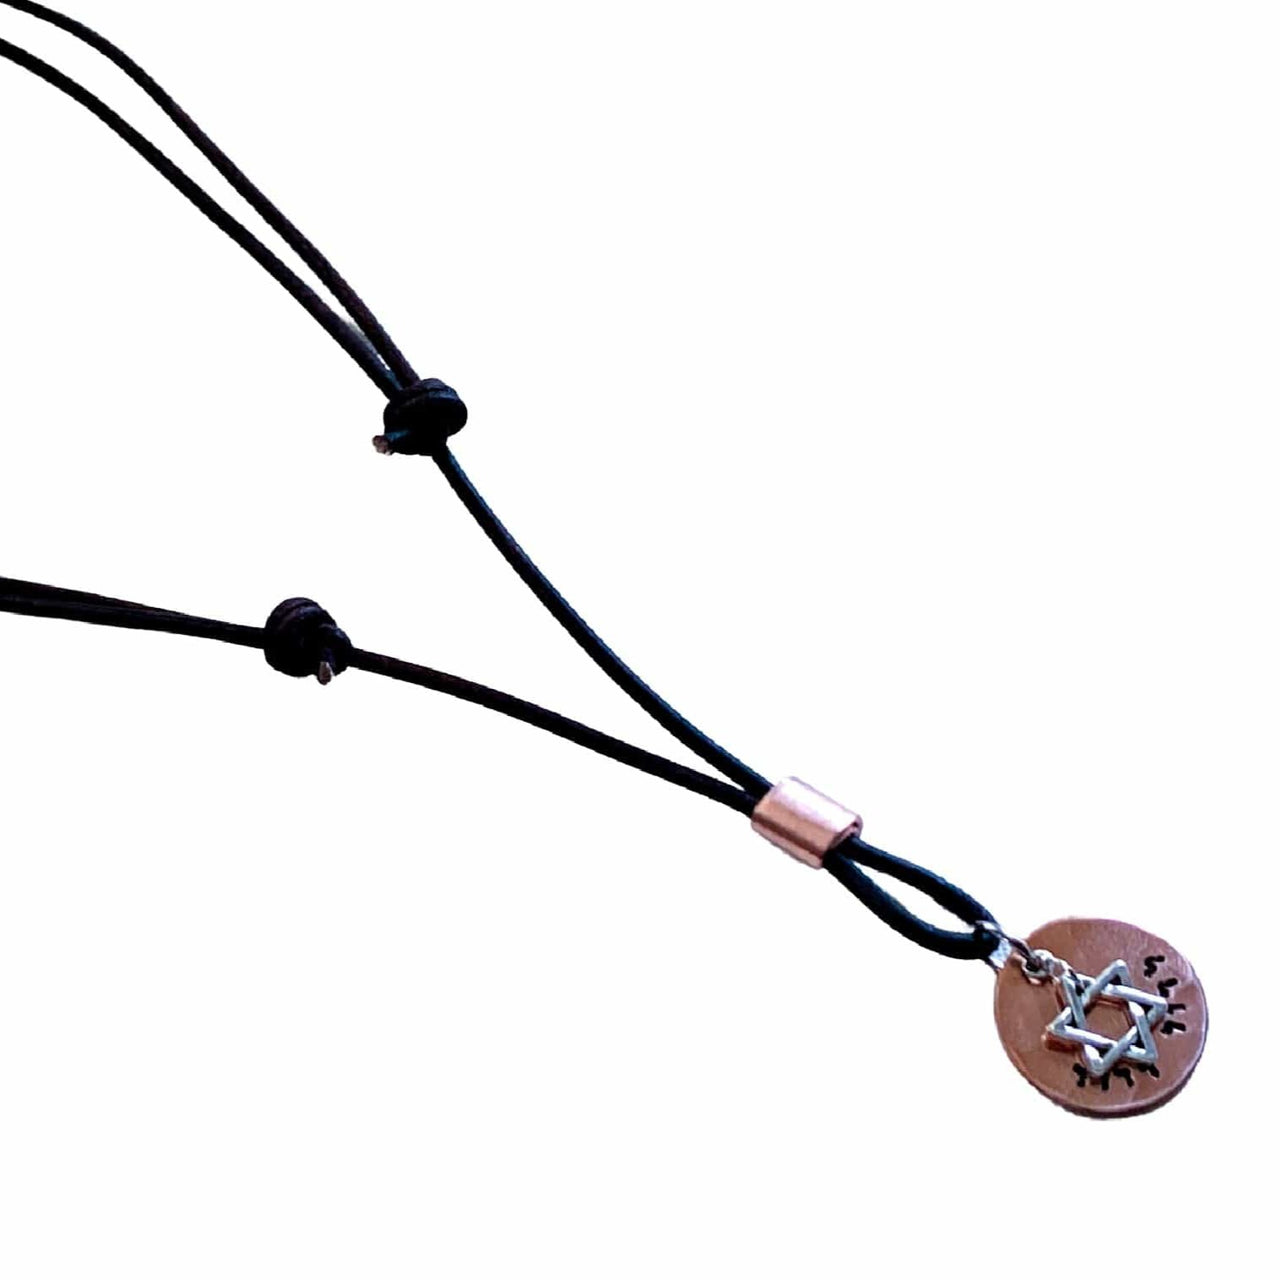 Everything Beautiful Necklaces L'dor V'dor Generation to Generation Leather Necklace - Copper, Brass or Sterling Silver